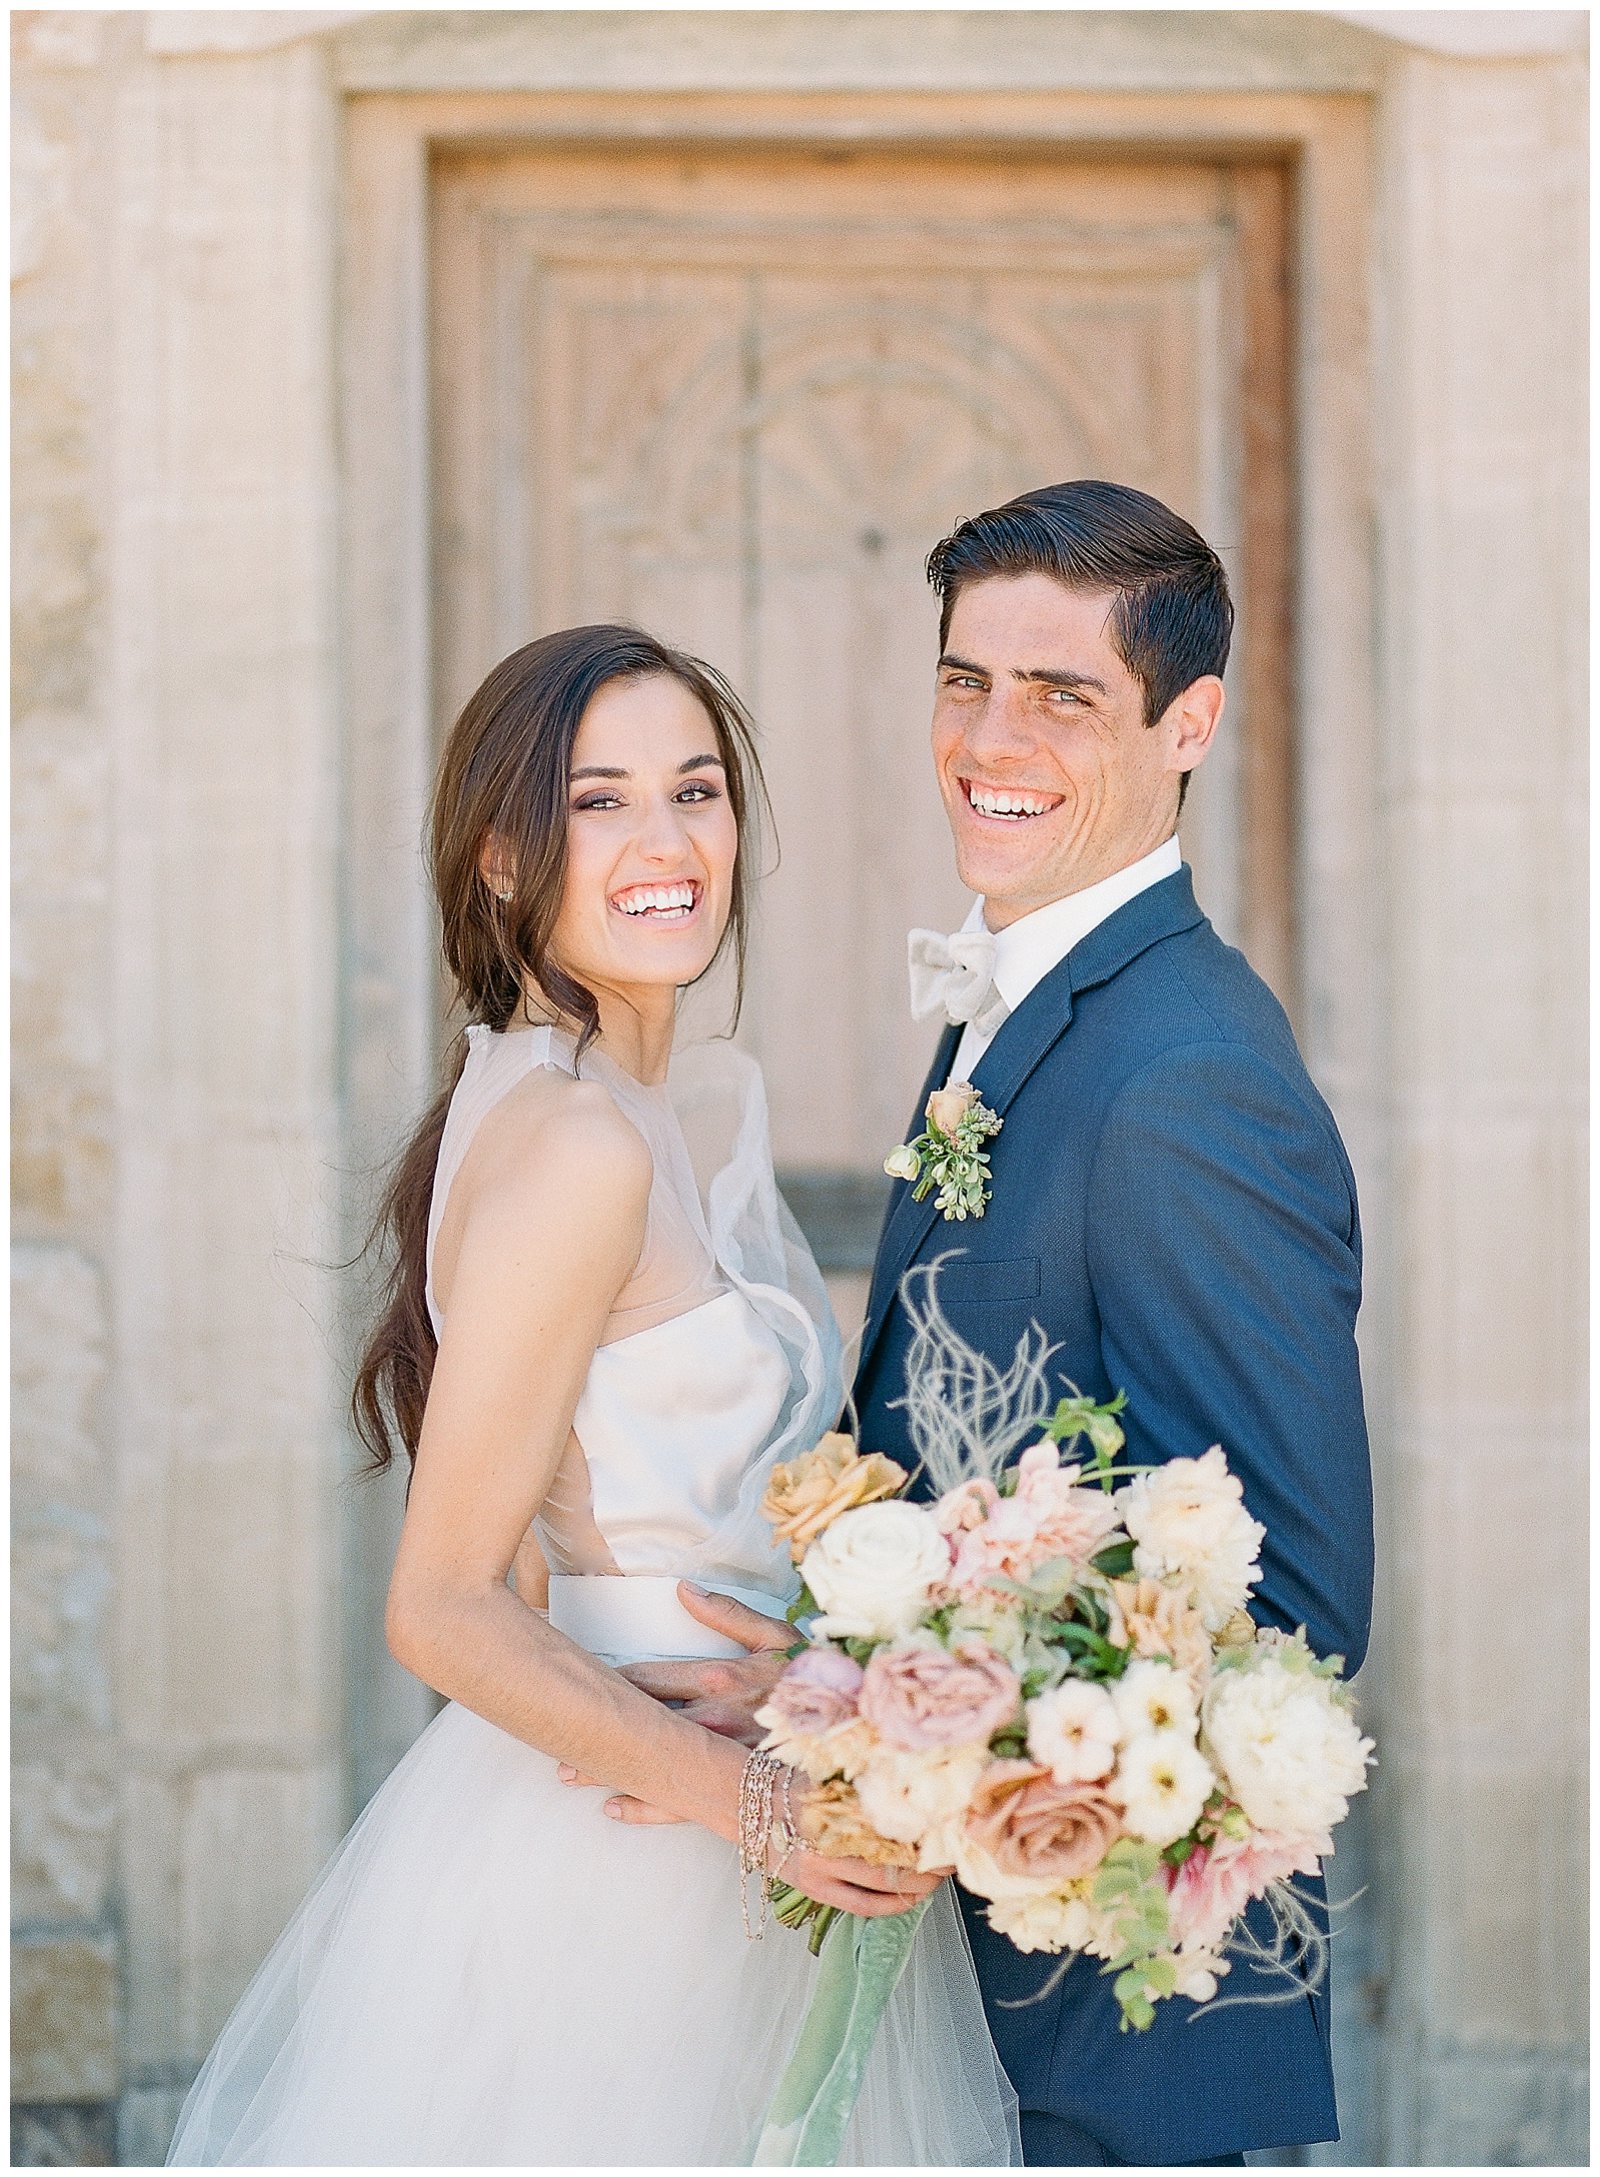 Sunstone Winery Wedding with French Inspiration - The Ganeys | Fine Art ...